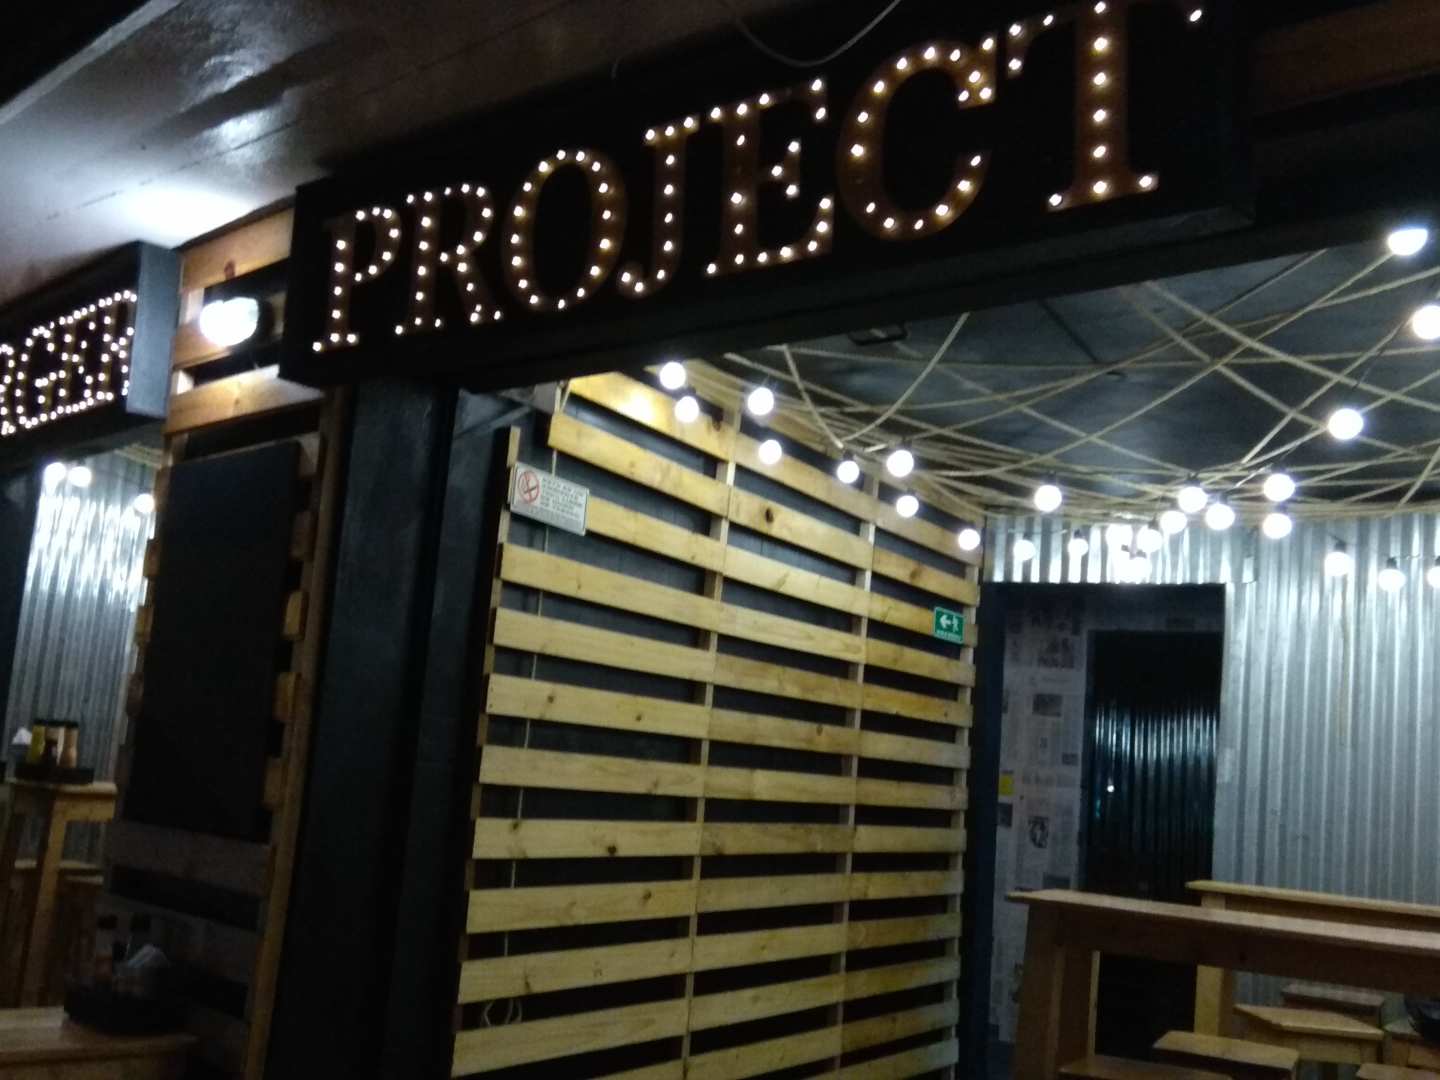 The Burger Project